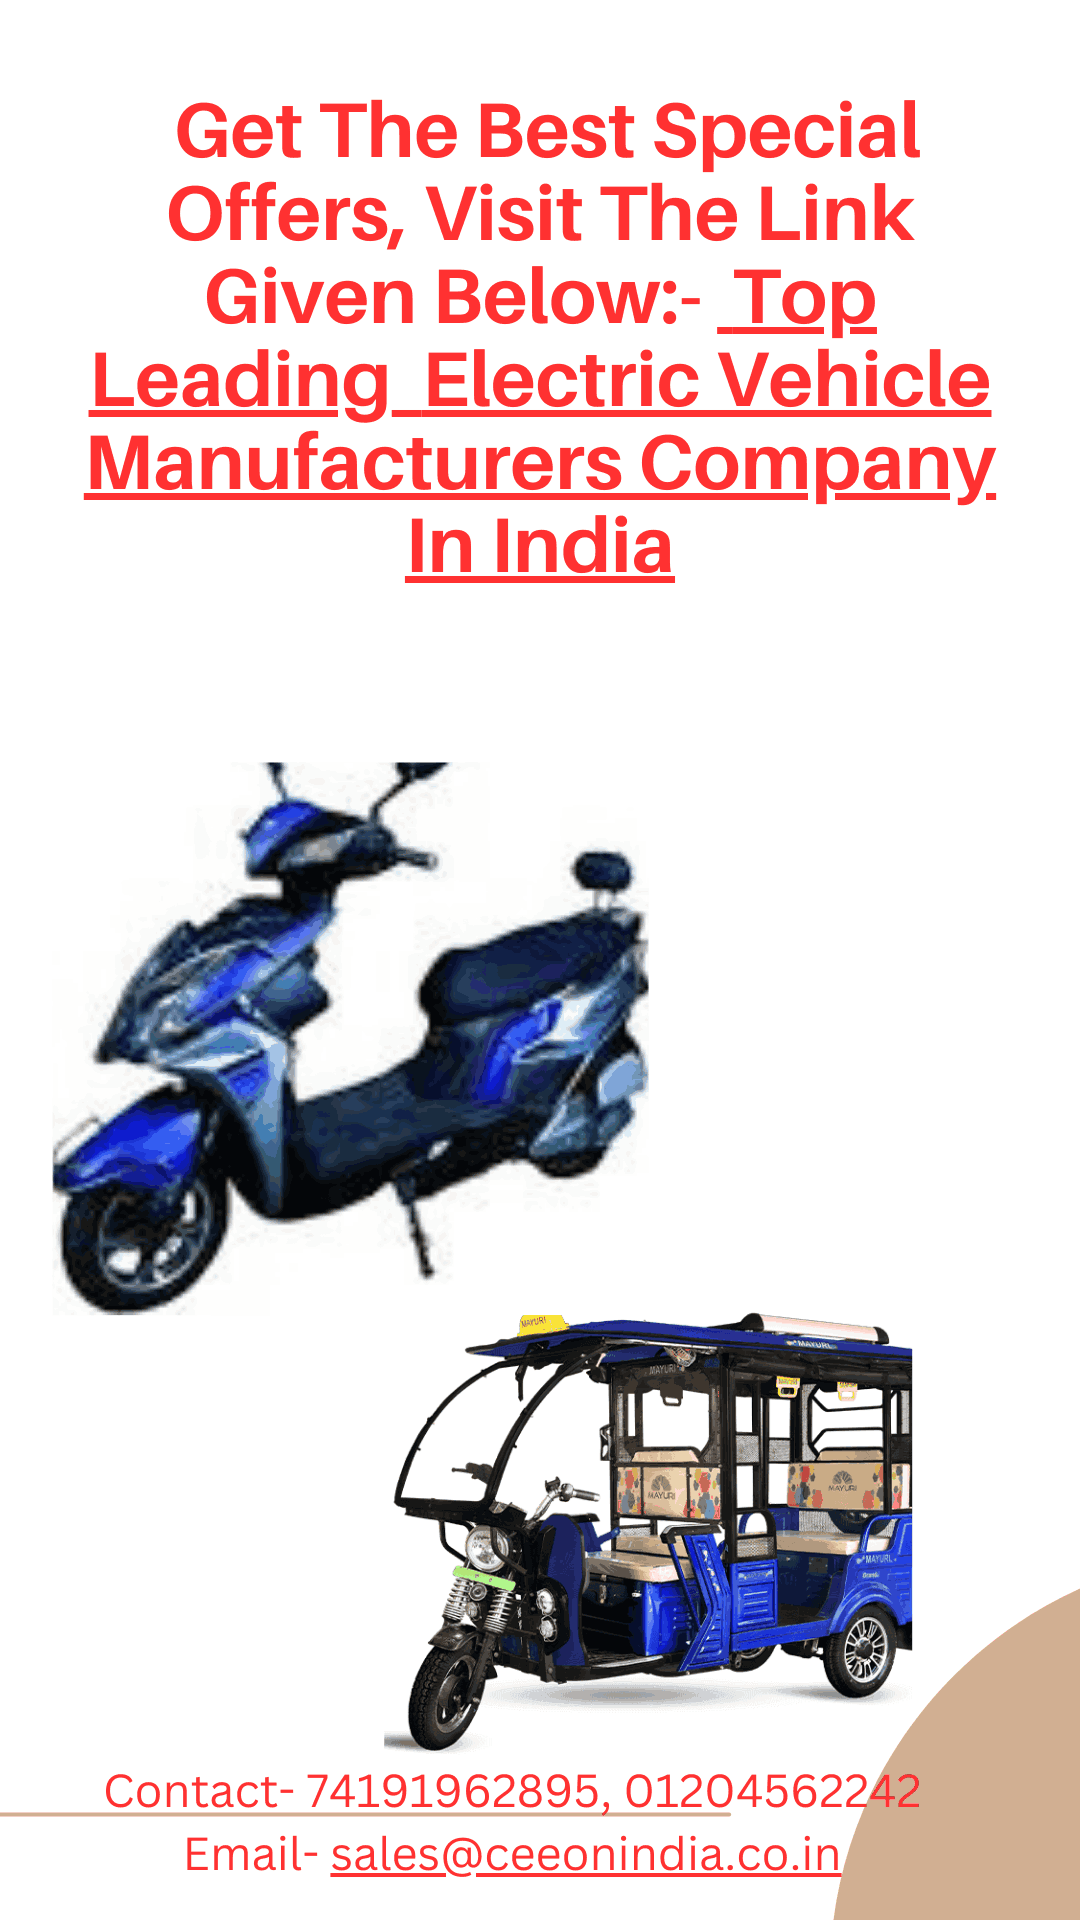 Get The Best Offer On Top Leading Electric Vehicle Manufacturers Company In India - Delhi Other